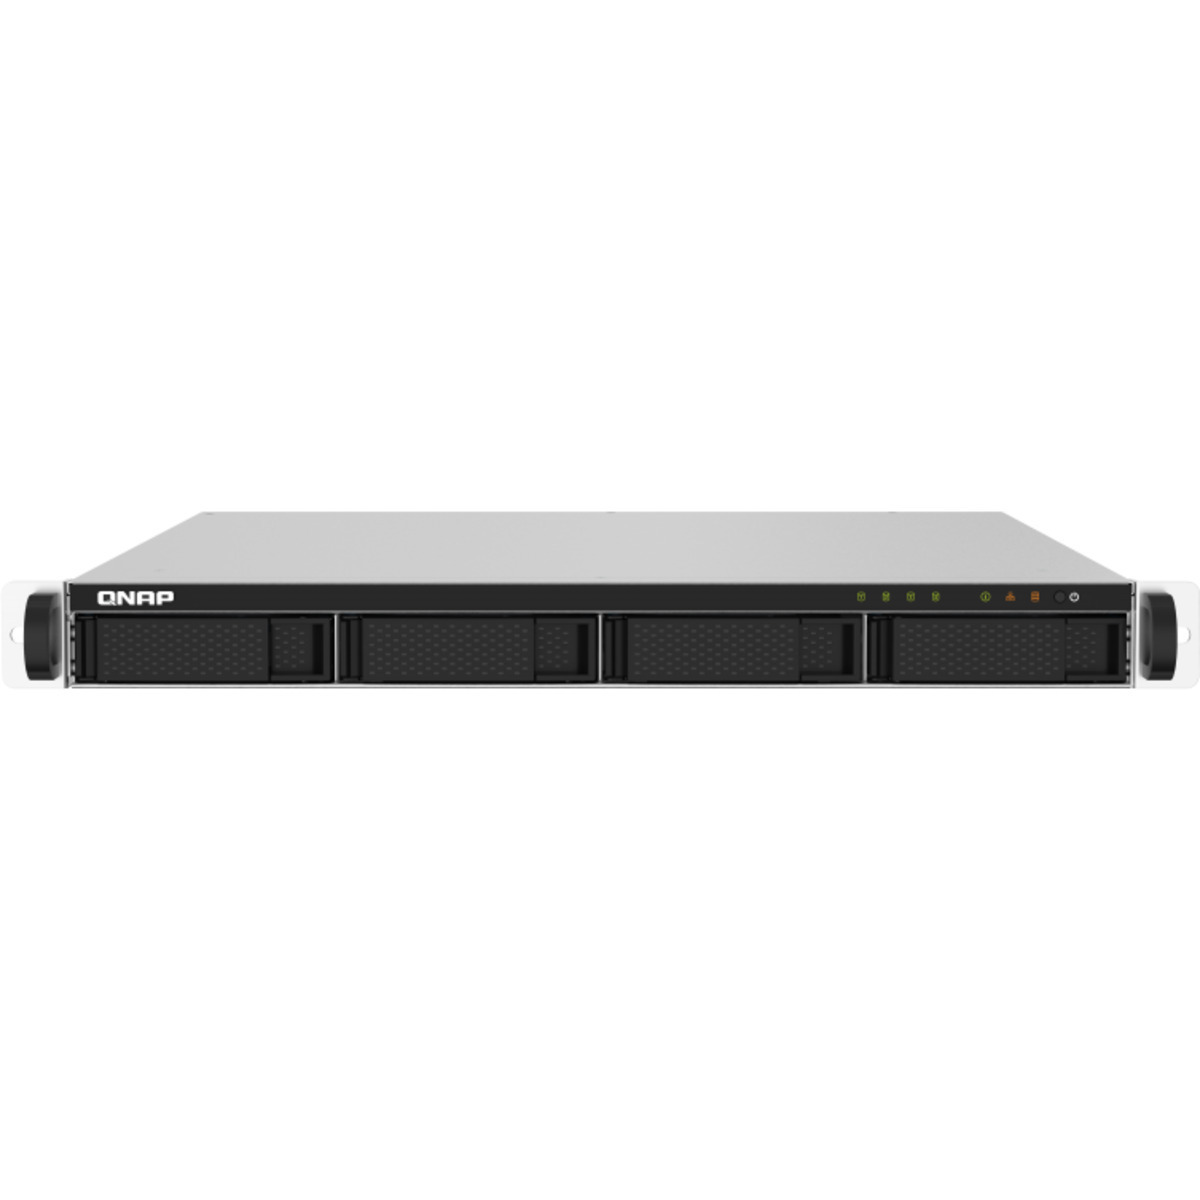 QNAP TS-432PXU 24tb 4-Bay RackMount Personal / Basic Home / Small Office NAS - Network Attached Storage Device 3x8tb Samsung 870 QVO MZ-77Q8T0 2.5 560/530MB/s SATA 6Gb/s SSD CONSUMER Class Drives Installed - Burn-In Tested - FREE RAM UPGRADE TS-432PXU